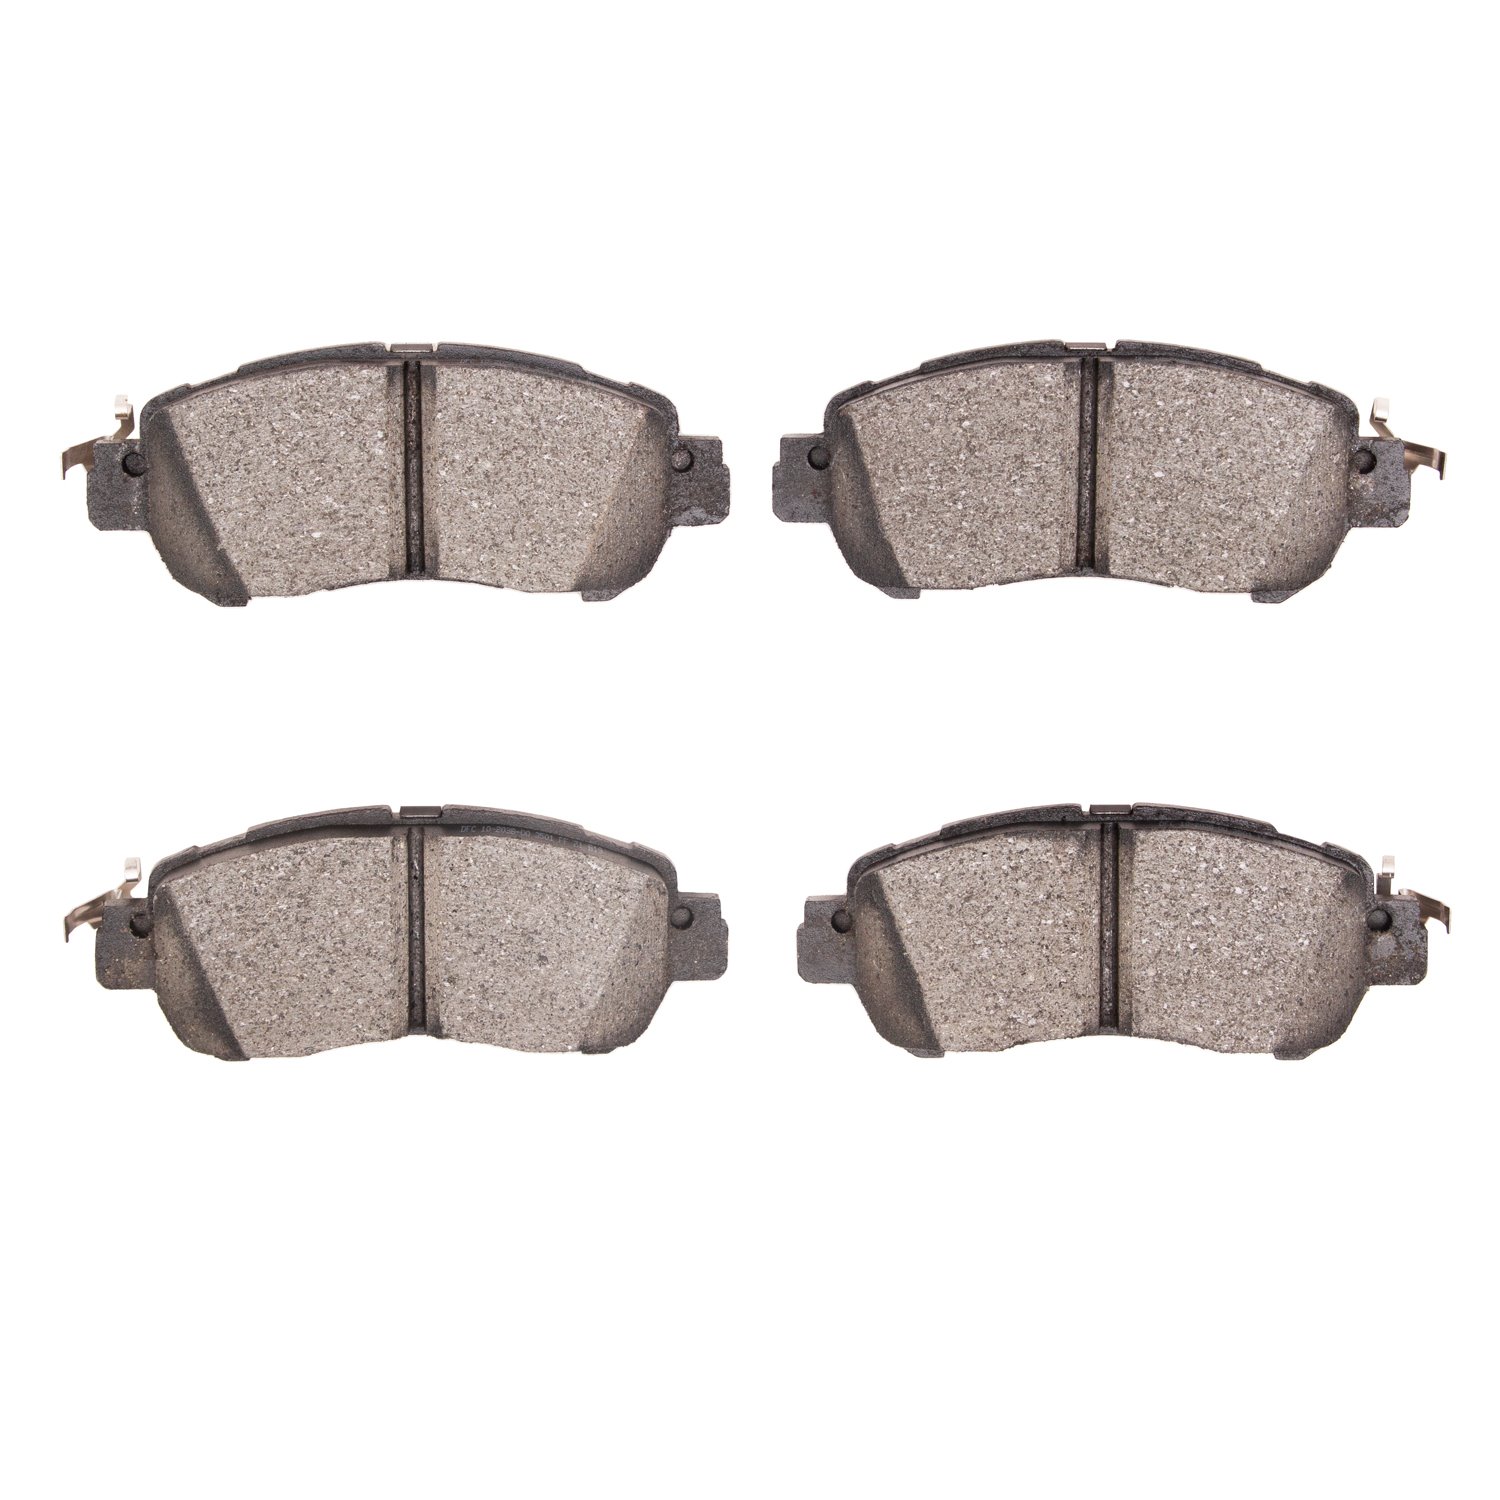 1551-2038-00 5000 Advanced Ceramic Brake Pads, Fits Select Infiniti/Nissan, Position: Front